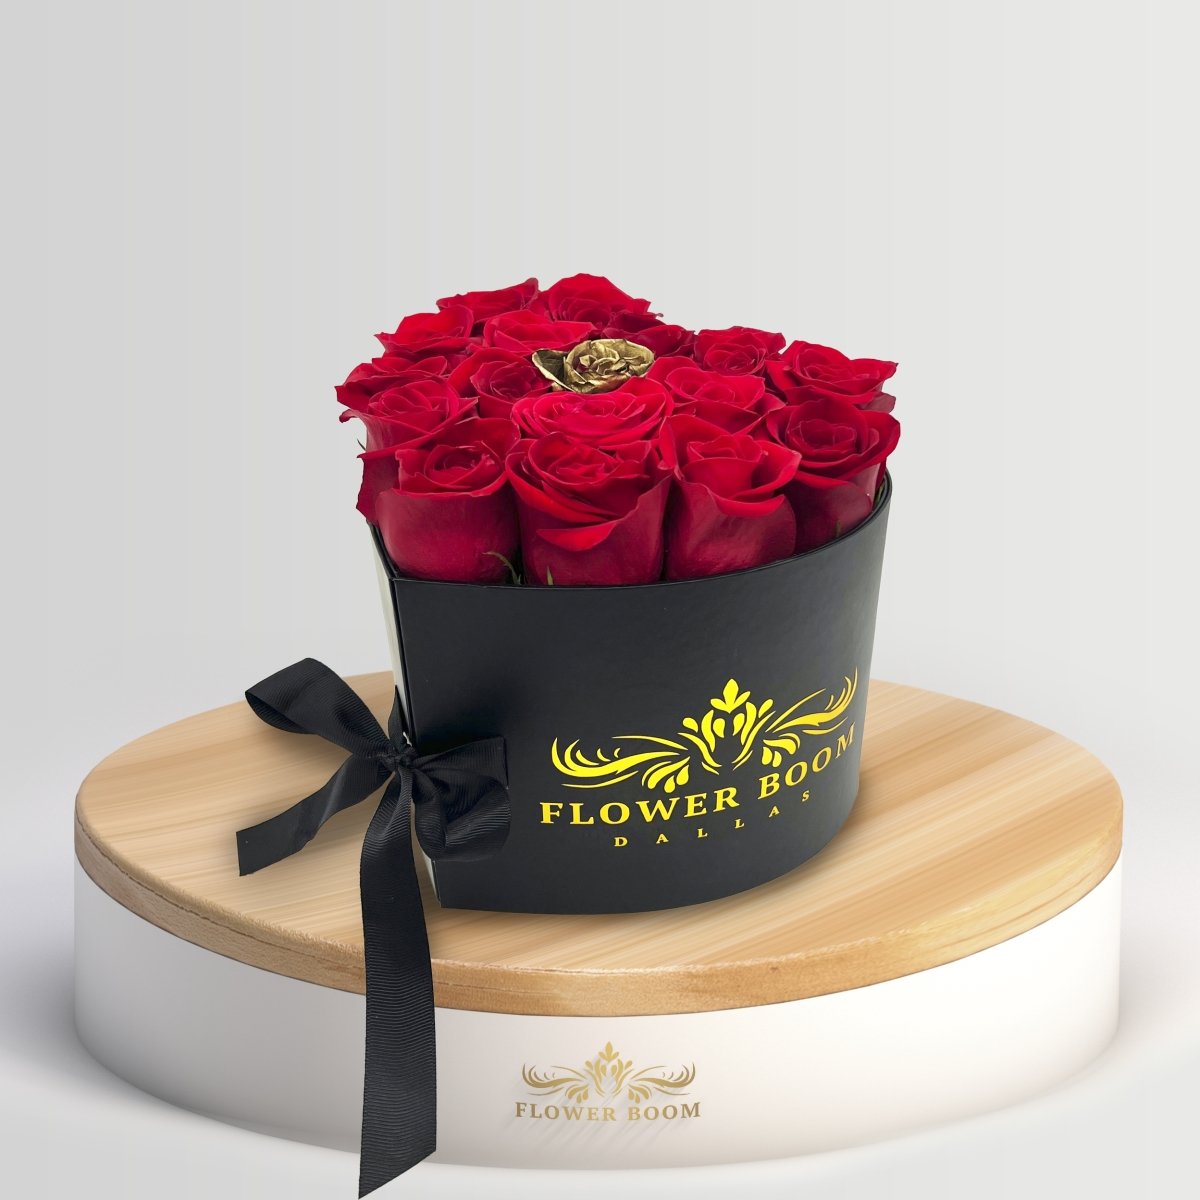 Red Roses & Chocolates In A Two Tier Heart Shaped Box - Flower Boom Dallas